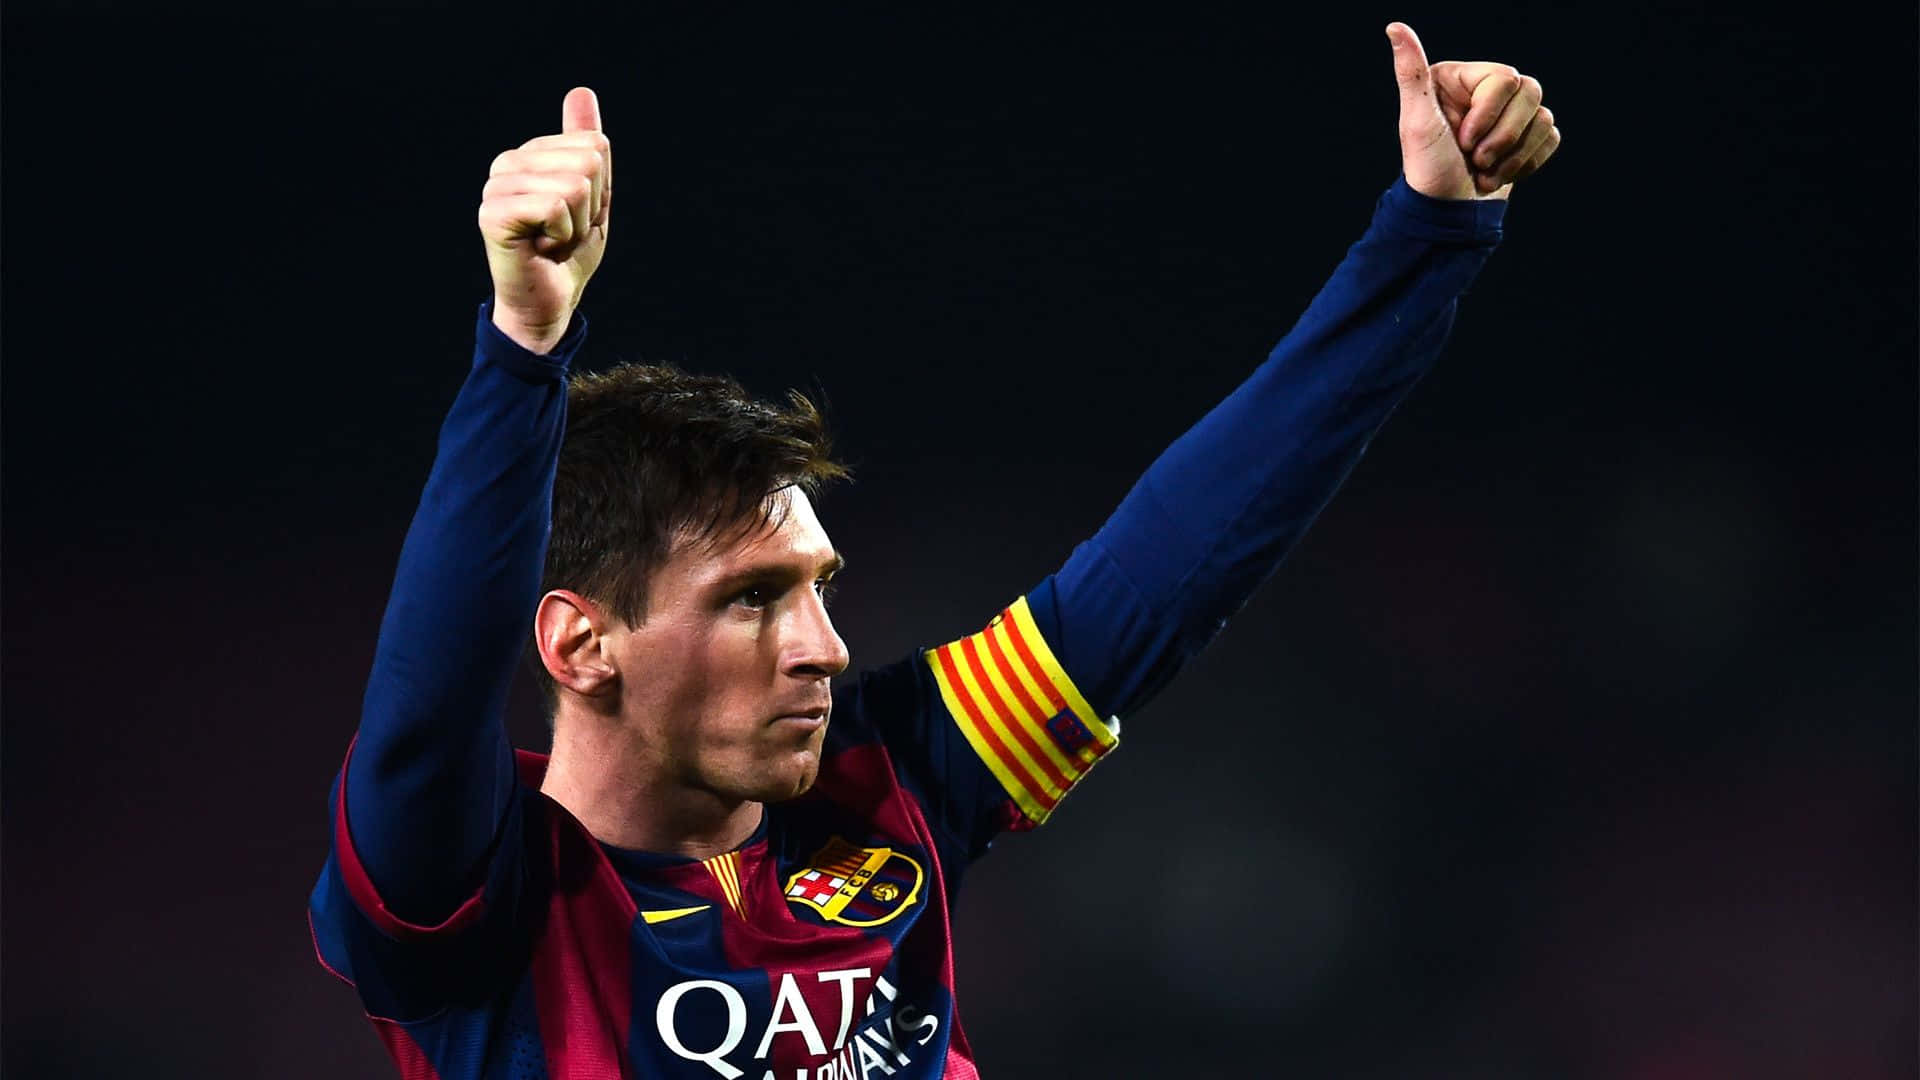 Lionel Messi, arguably the greatest footballer of all time